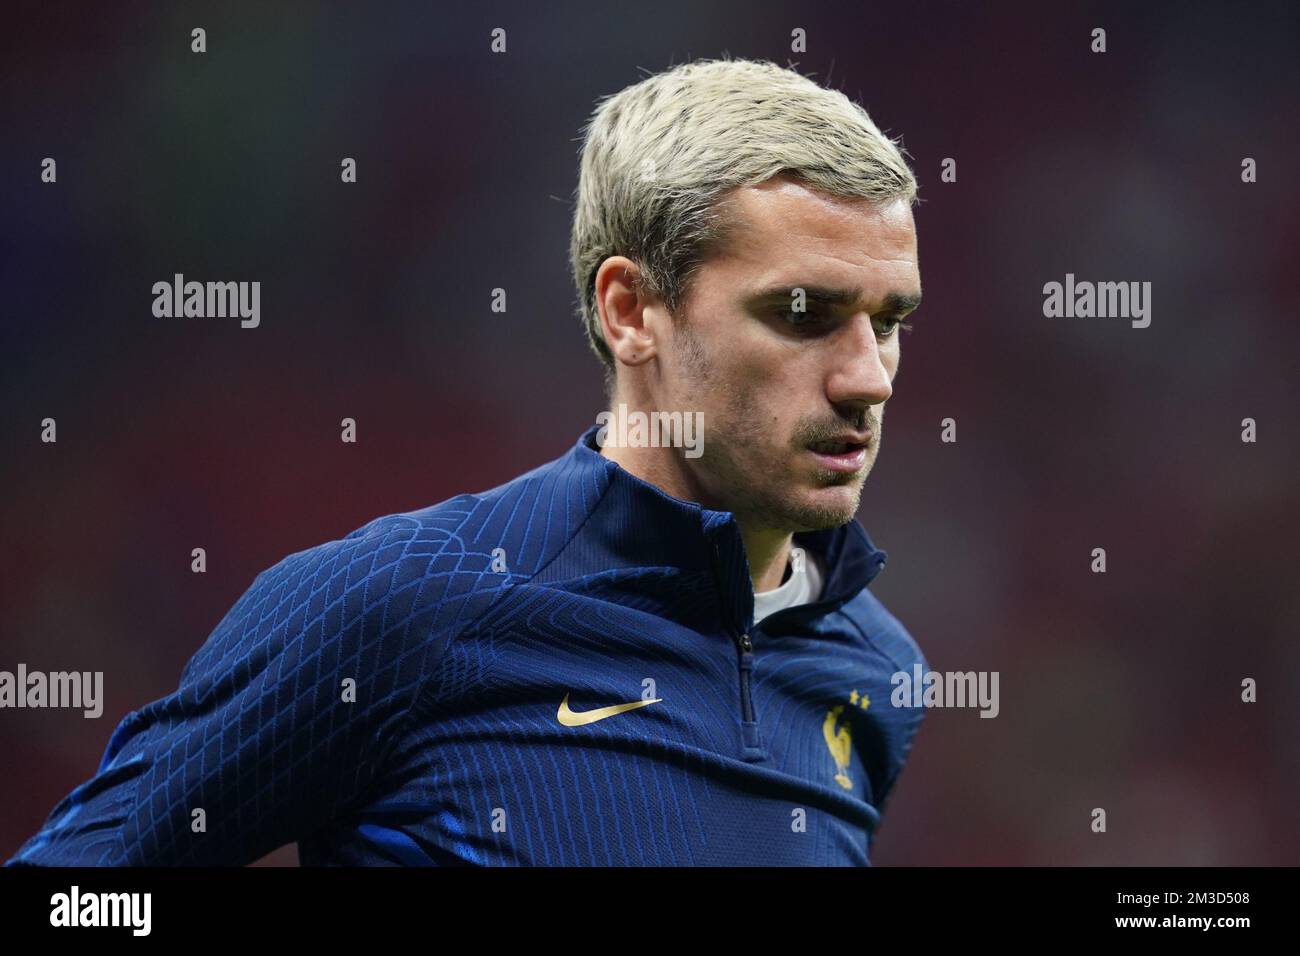 DOHA, QATAR - DECEMBER 14: Player of France Antoine Griezmann warms up before the FIFA World Cup Qatar 2022 Semi-finals match between France and Morocco at Al Bayt Stadium on December 14, 2022 in Al Khor, Qatar. (Photo by Florencia Tan Jun/PxImages) Credit: Px Images/Alamy Live News Stock Photo